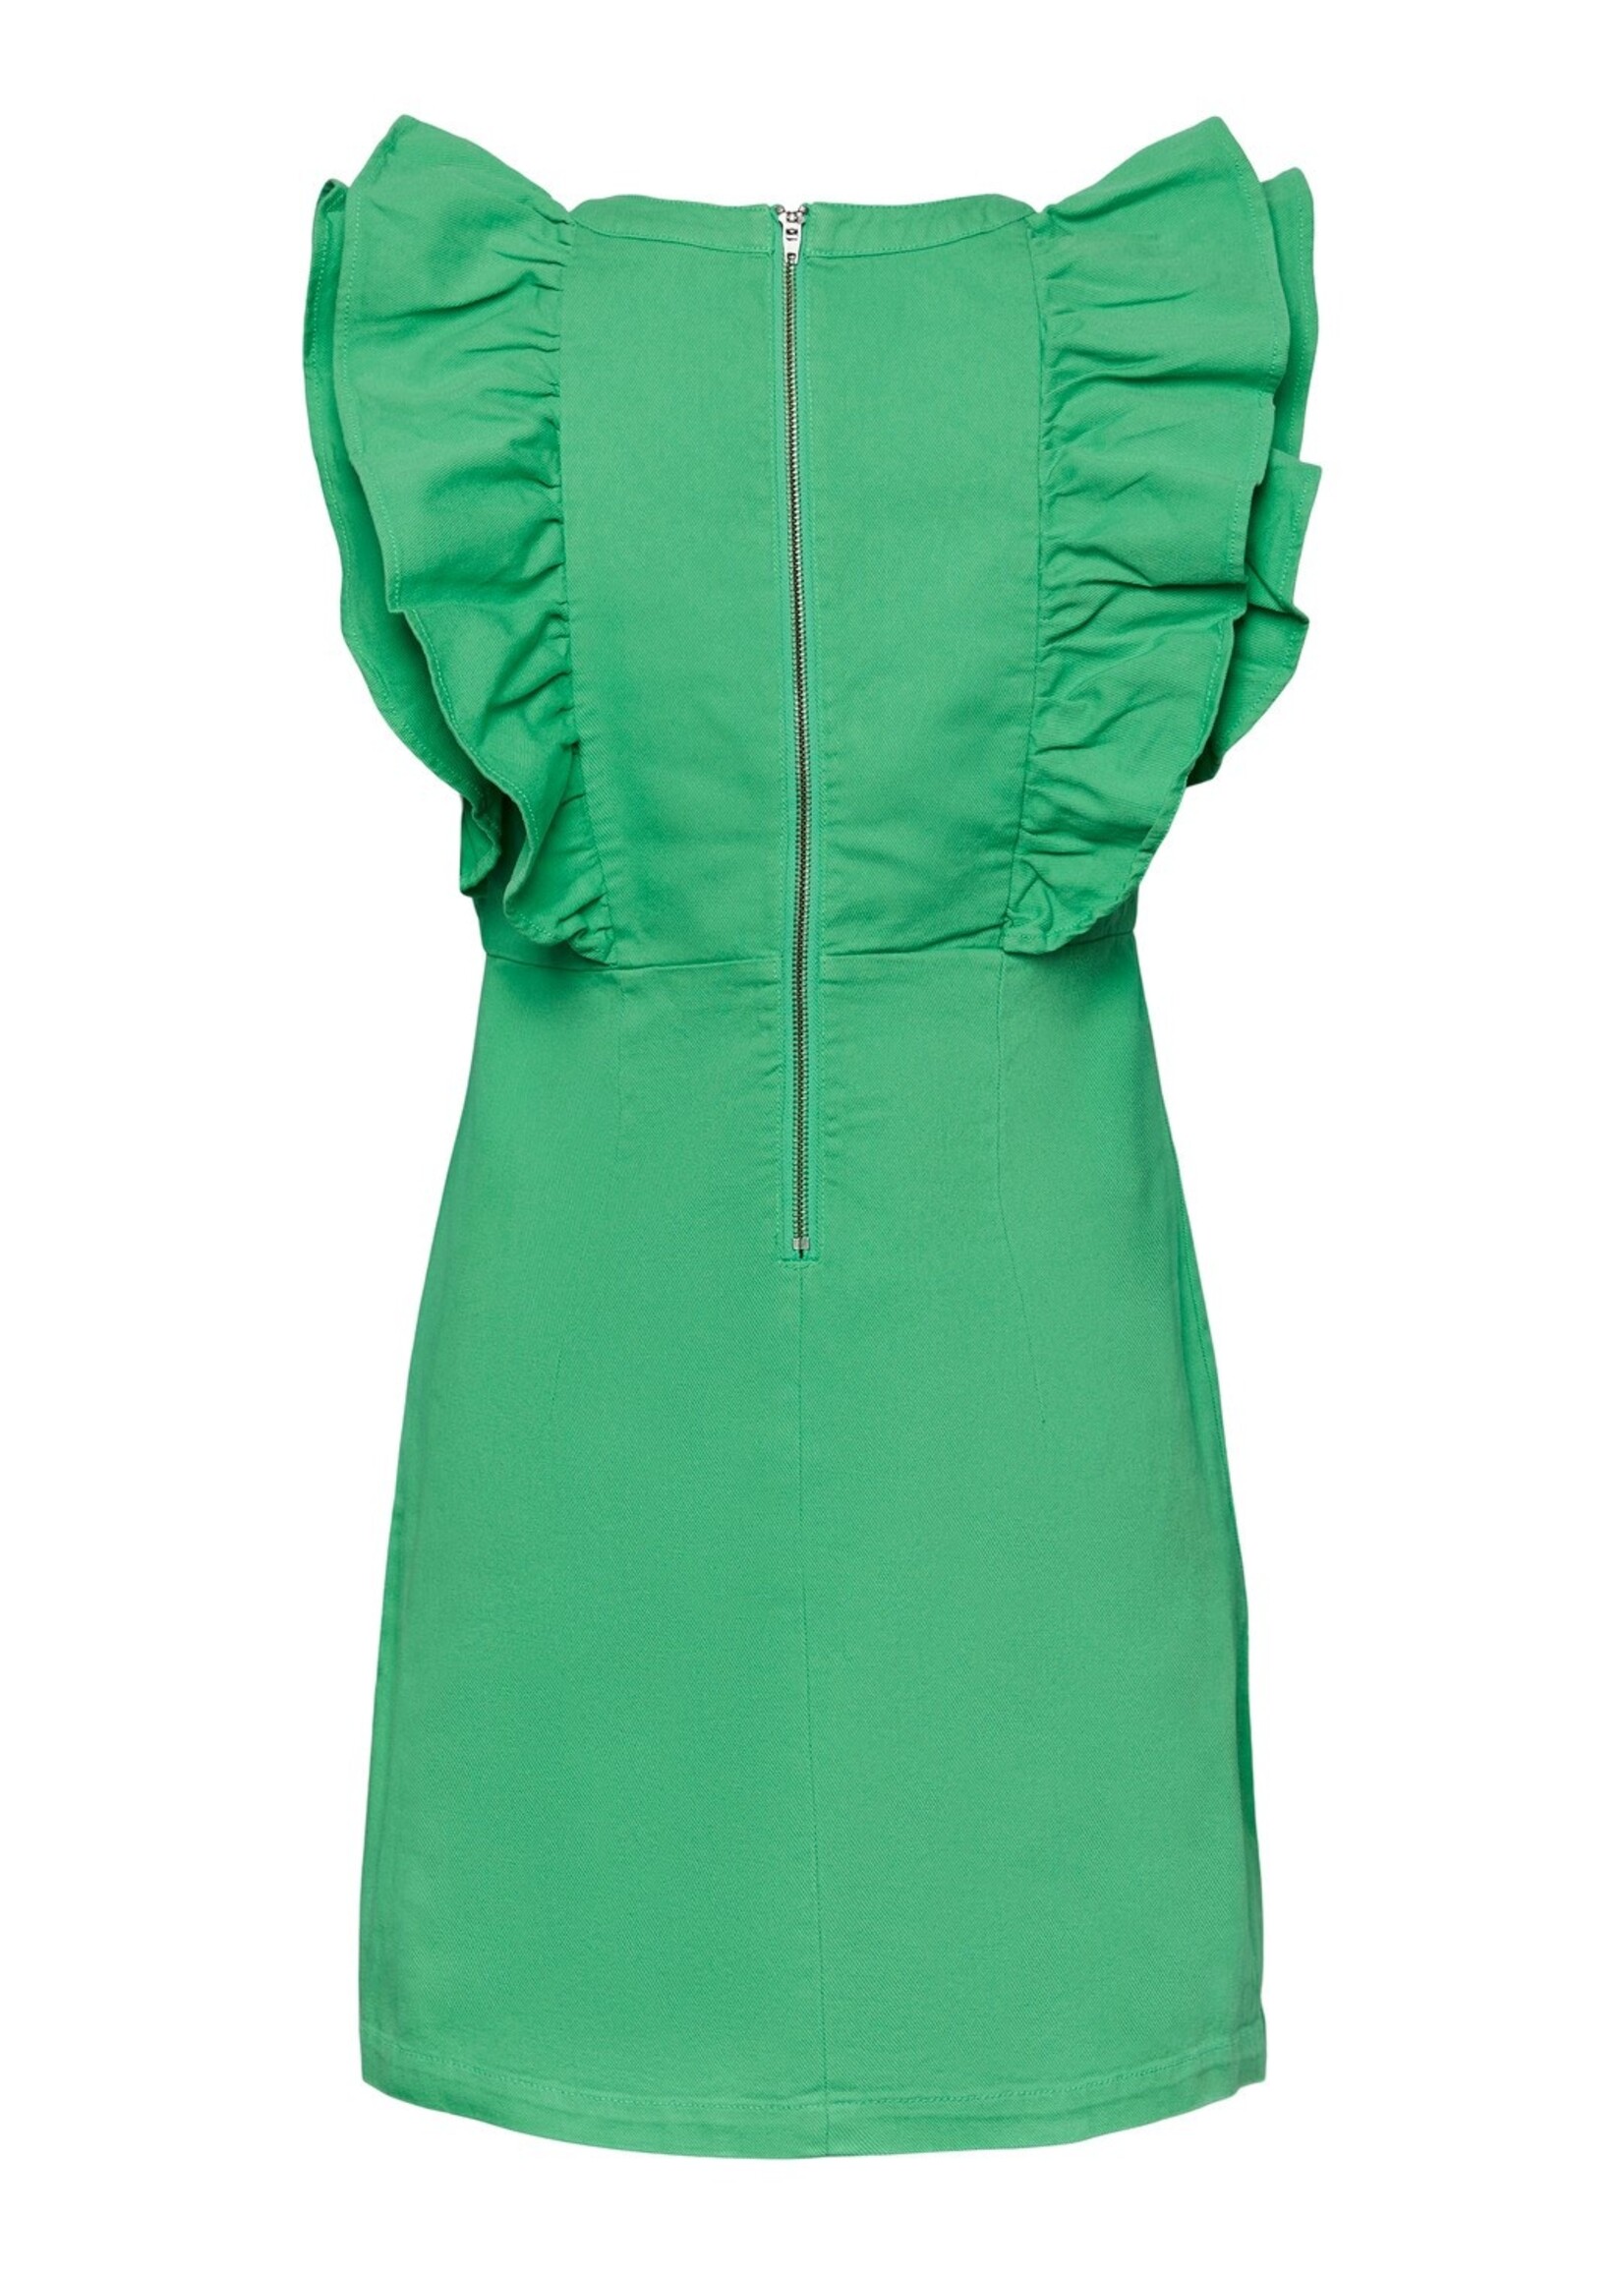 Pieces Pieces - Ama ruffle dress - Green